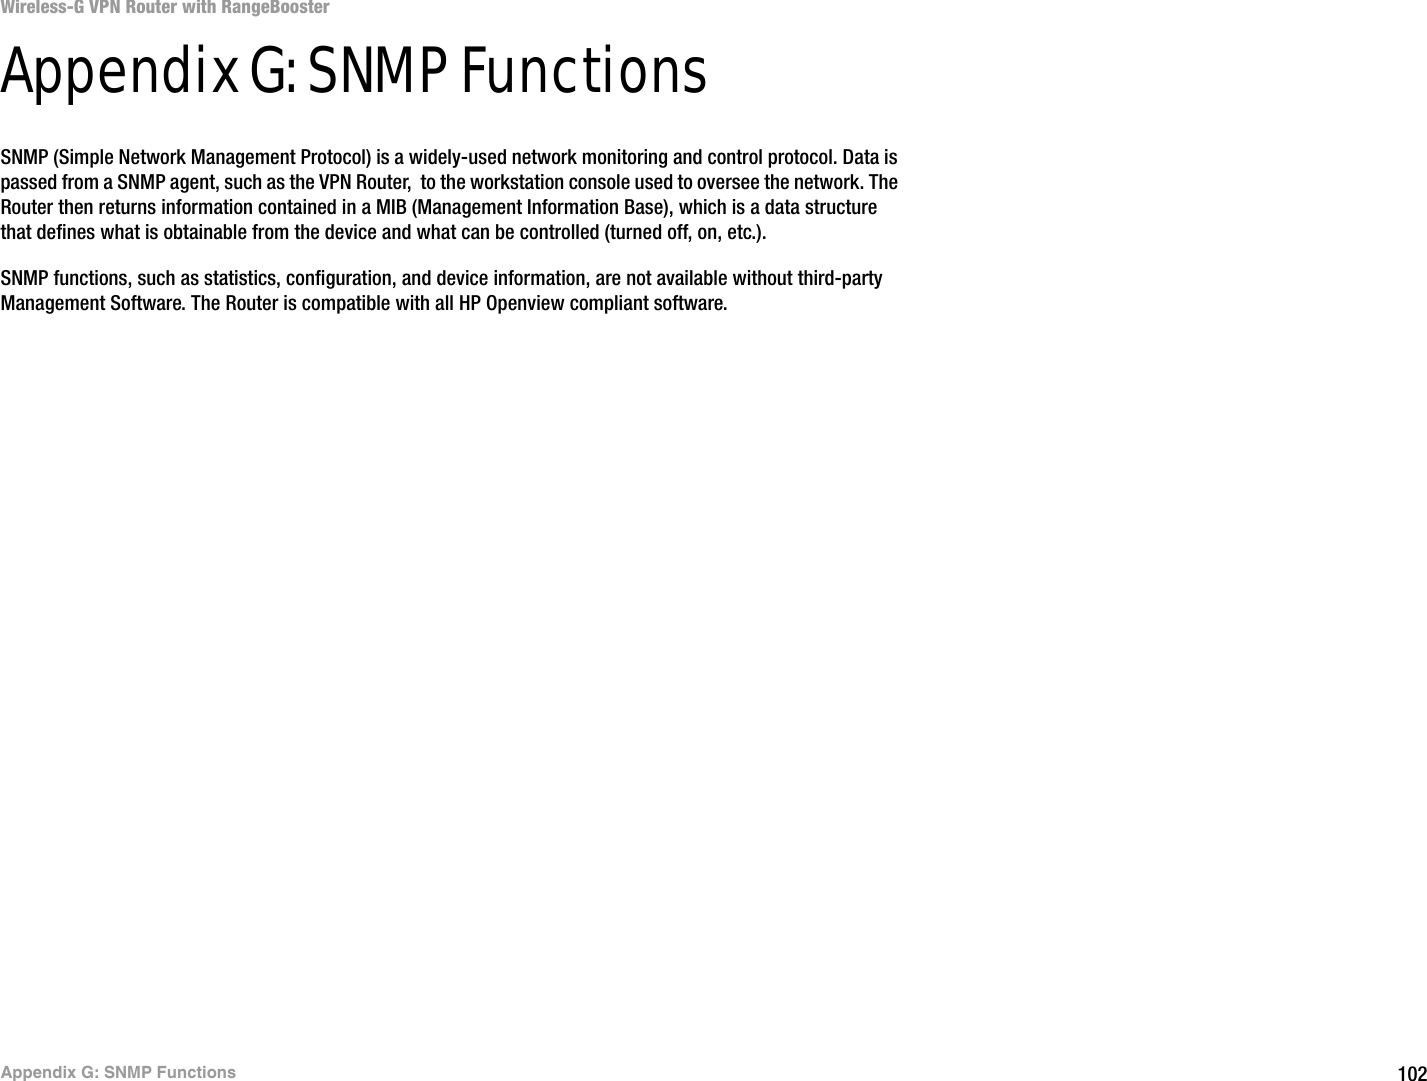 102Appendix G: SNMP FunctionsWireless-G VPN Router with RangeBoosterAppendix G: SNMP FunctionsSNMP (Simple Network Management Protocol) is a widely-used network monitoring and control protocol. Data is passed from a SNMP agent, such as the VPN Router,  to the workstation console used to oversee the network. The Router then returns information contained in a MIB (Management Information Base), which is a data structure that defines what is obtainable from the device and what can be controlled (turned off, on, etc.).SNMP functions, such as statistics, configuration, and device information, are not available without third-party Management Software. The Router is compatible with all HP Openview compliant software.